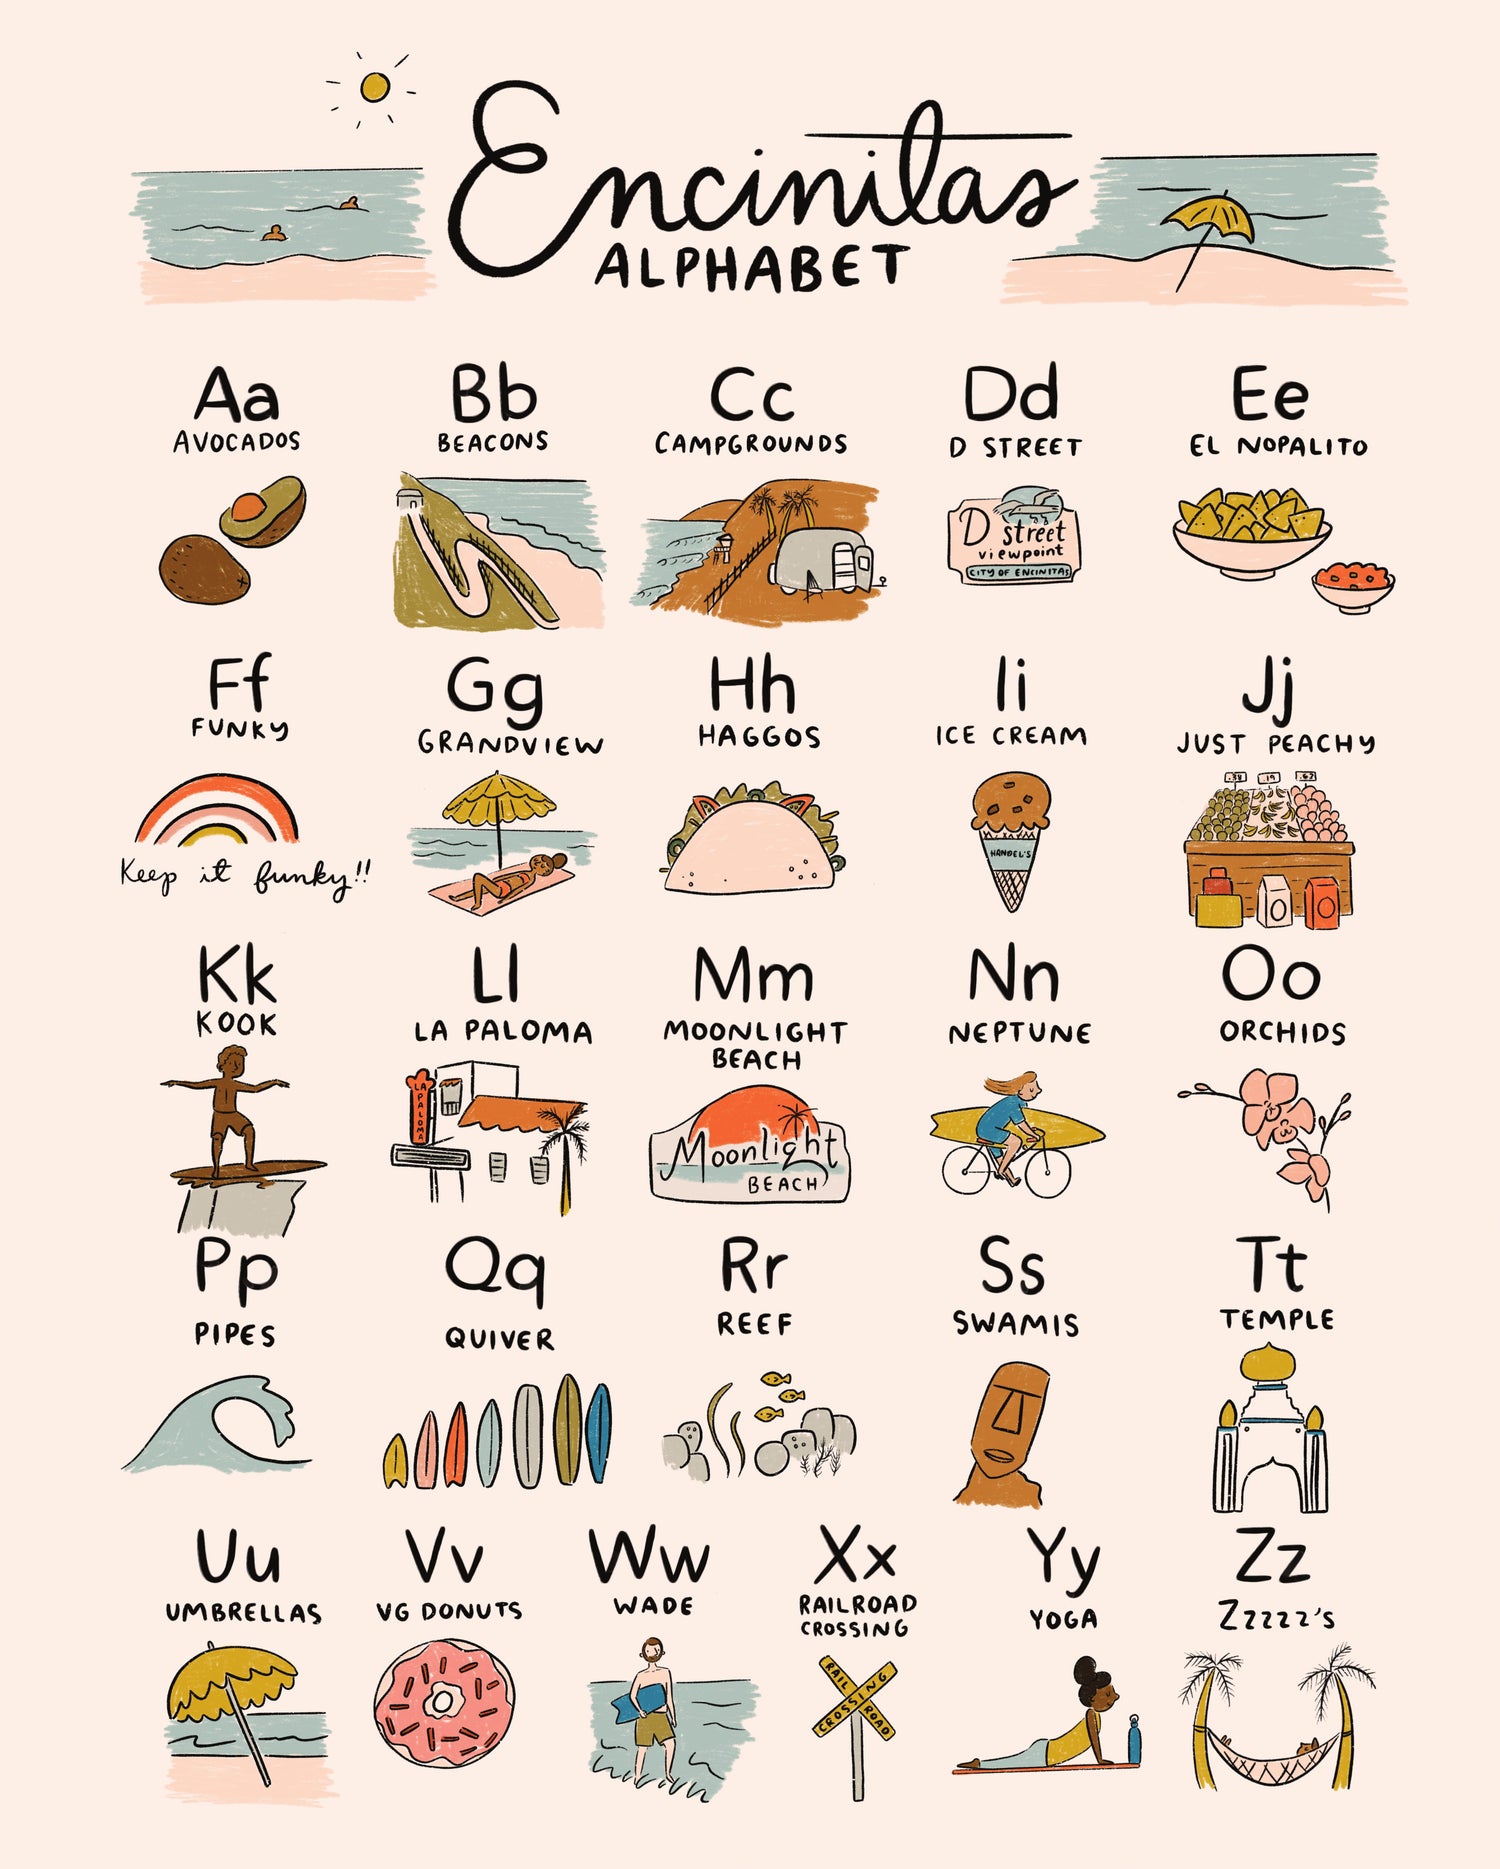 Hand drawn by Abbie Paulhus, this Encinitas alphabet print features local favorites and is sold by Thread Spun